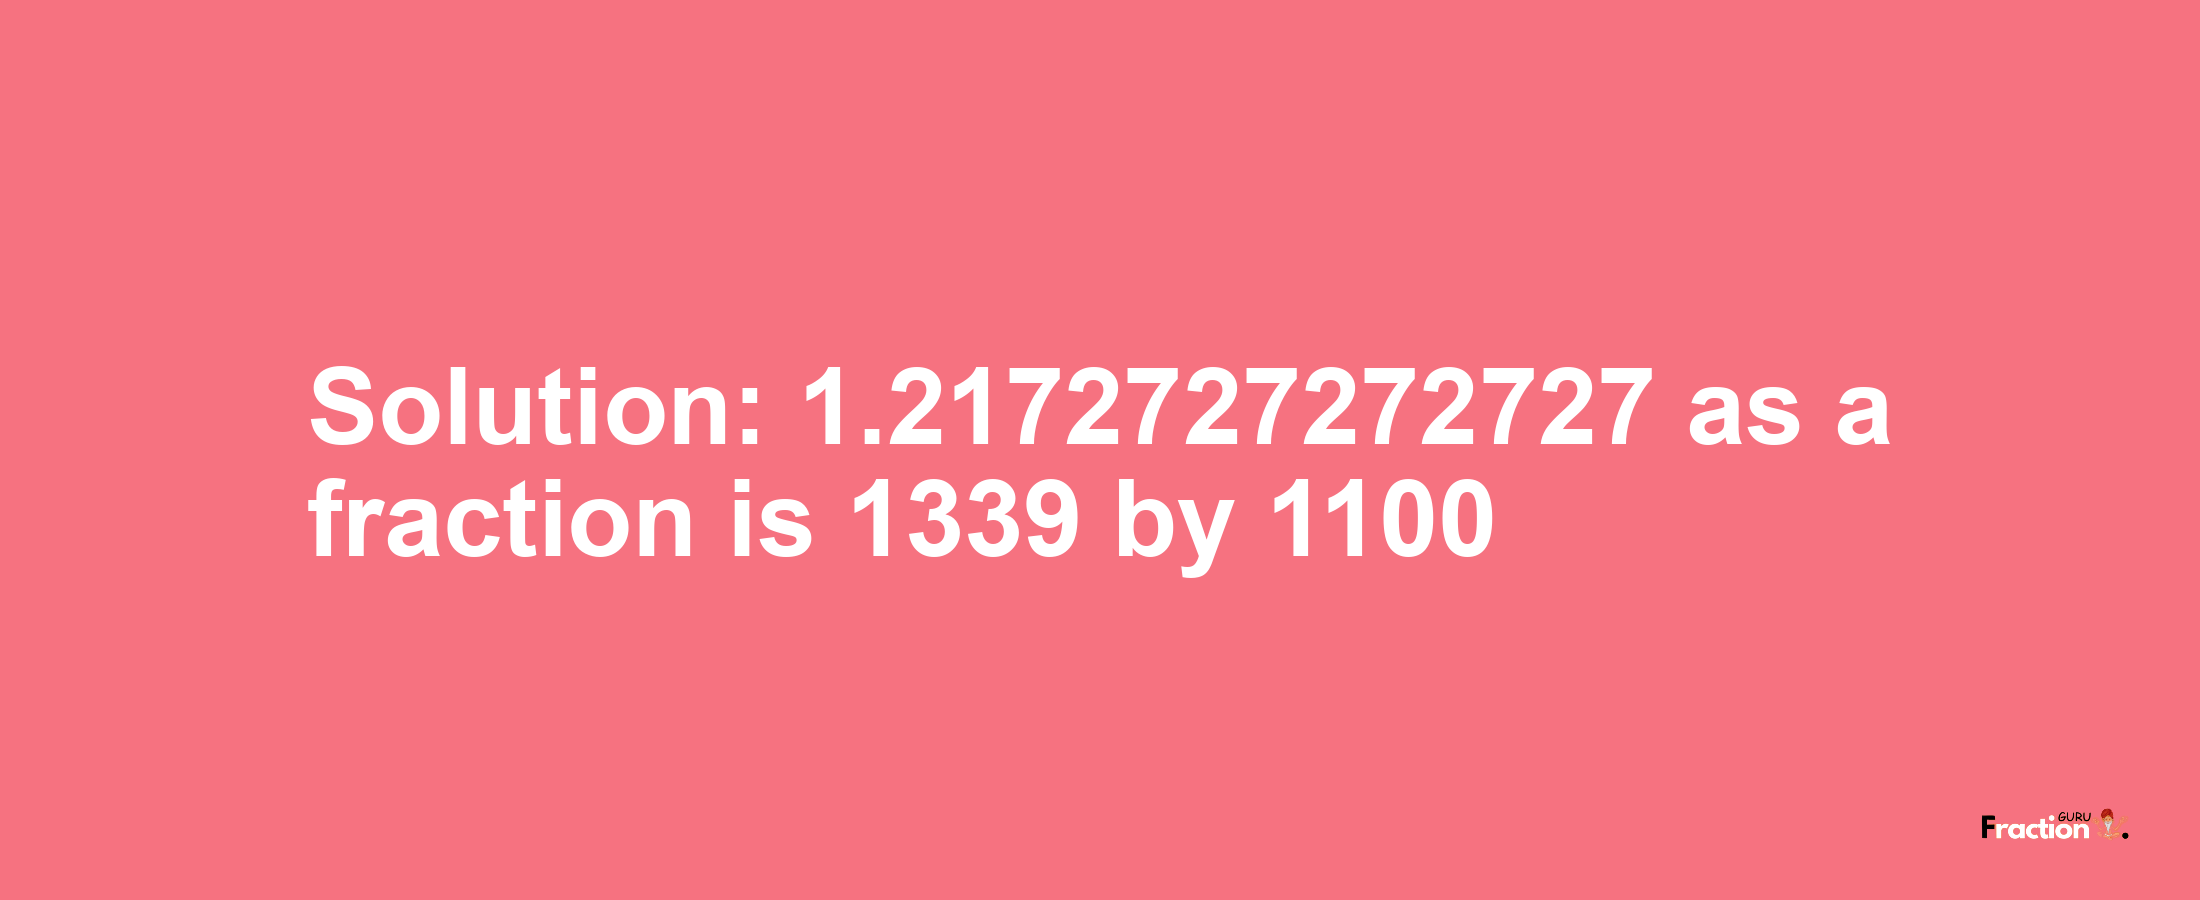 Solution:1.2172727272727 as a fraction is 1339/1100